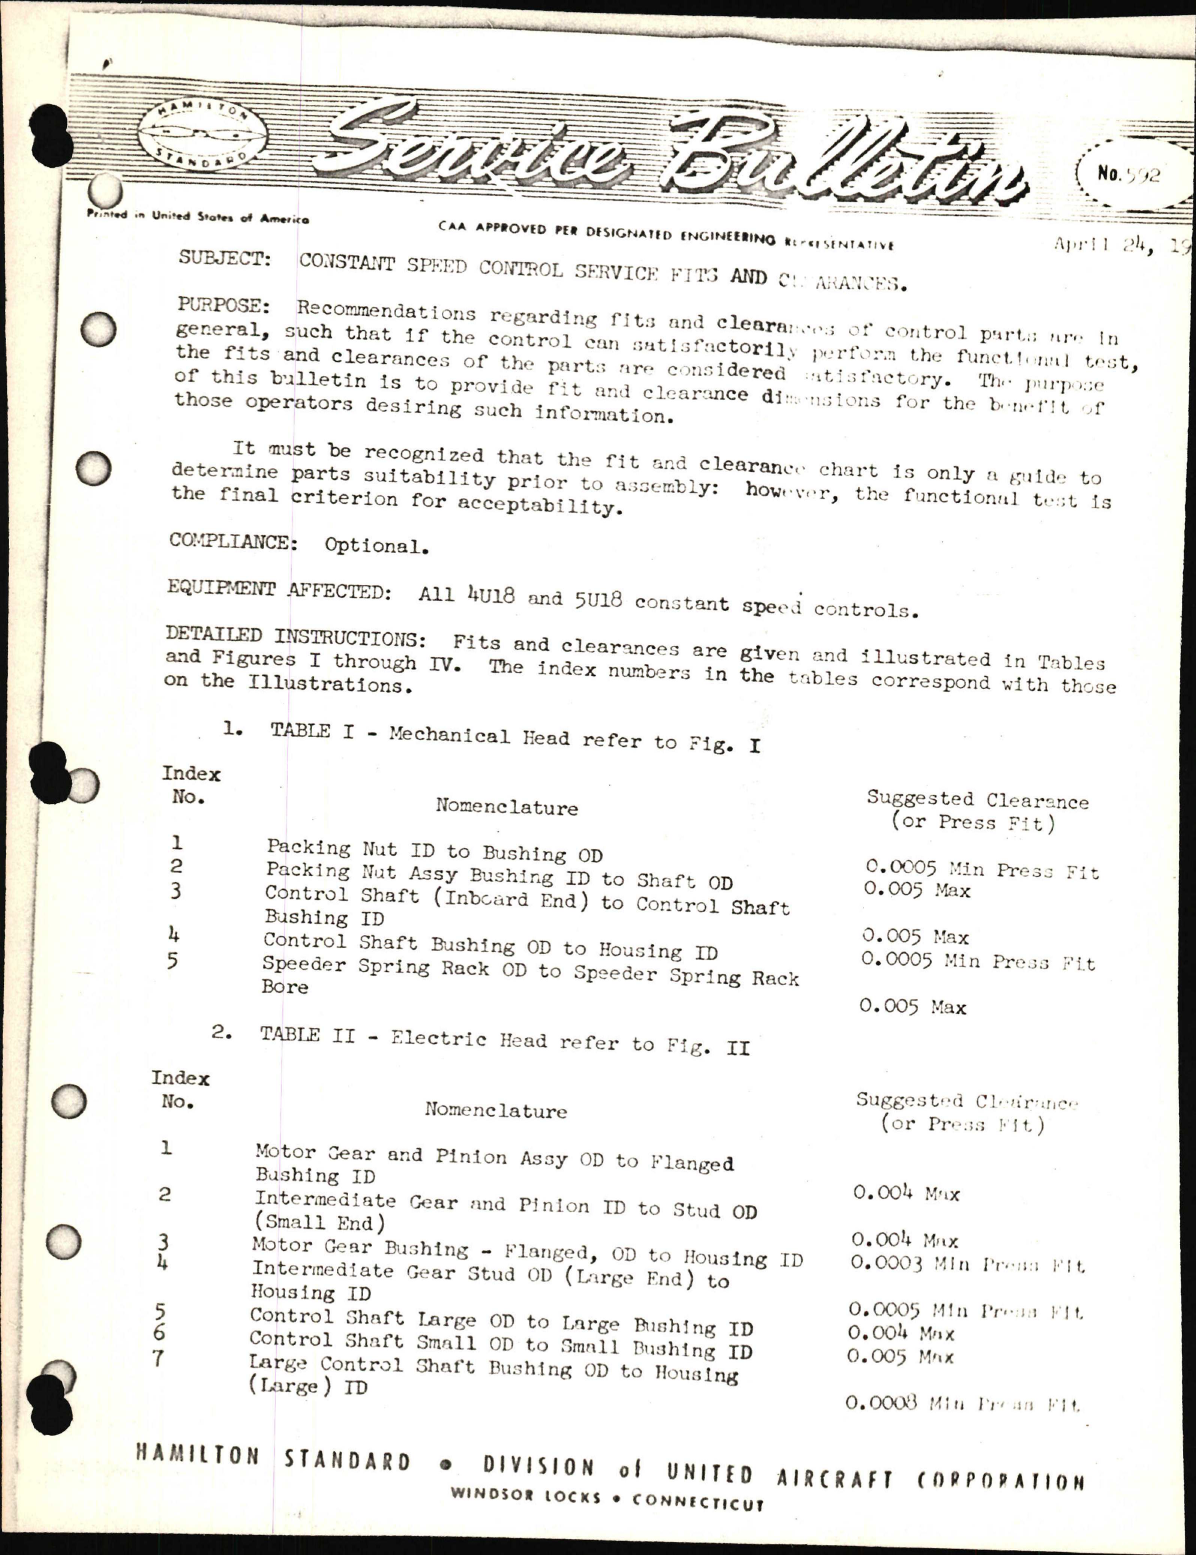 Sample page 1 from AirCorps Library document: Constant Speed Control Service Fits and Clearances